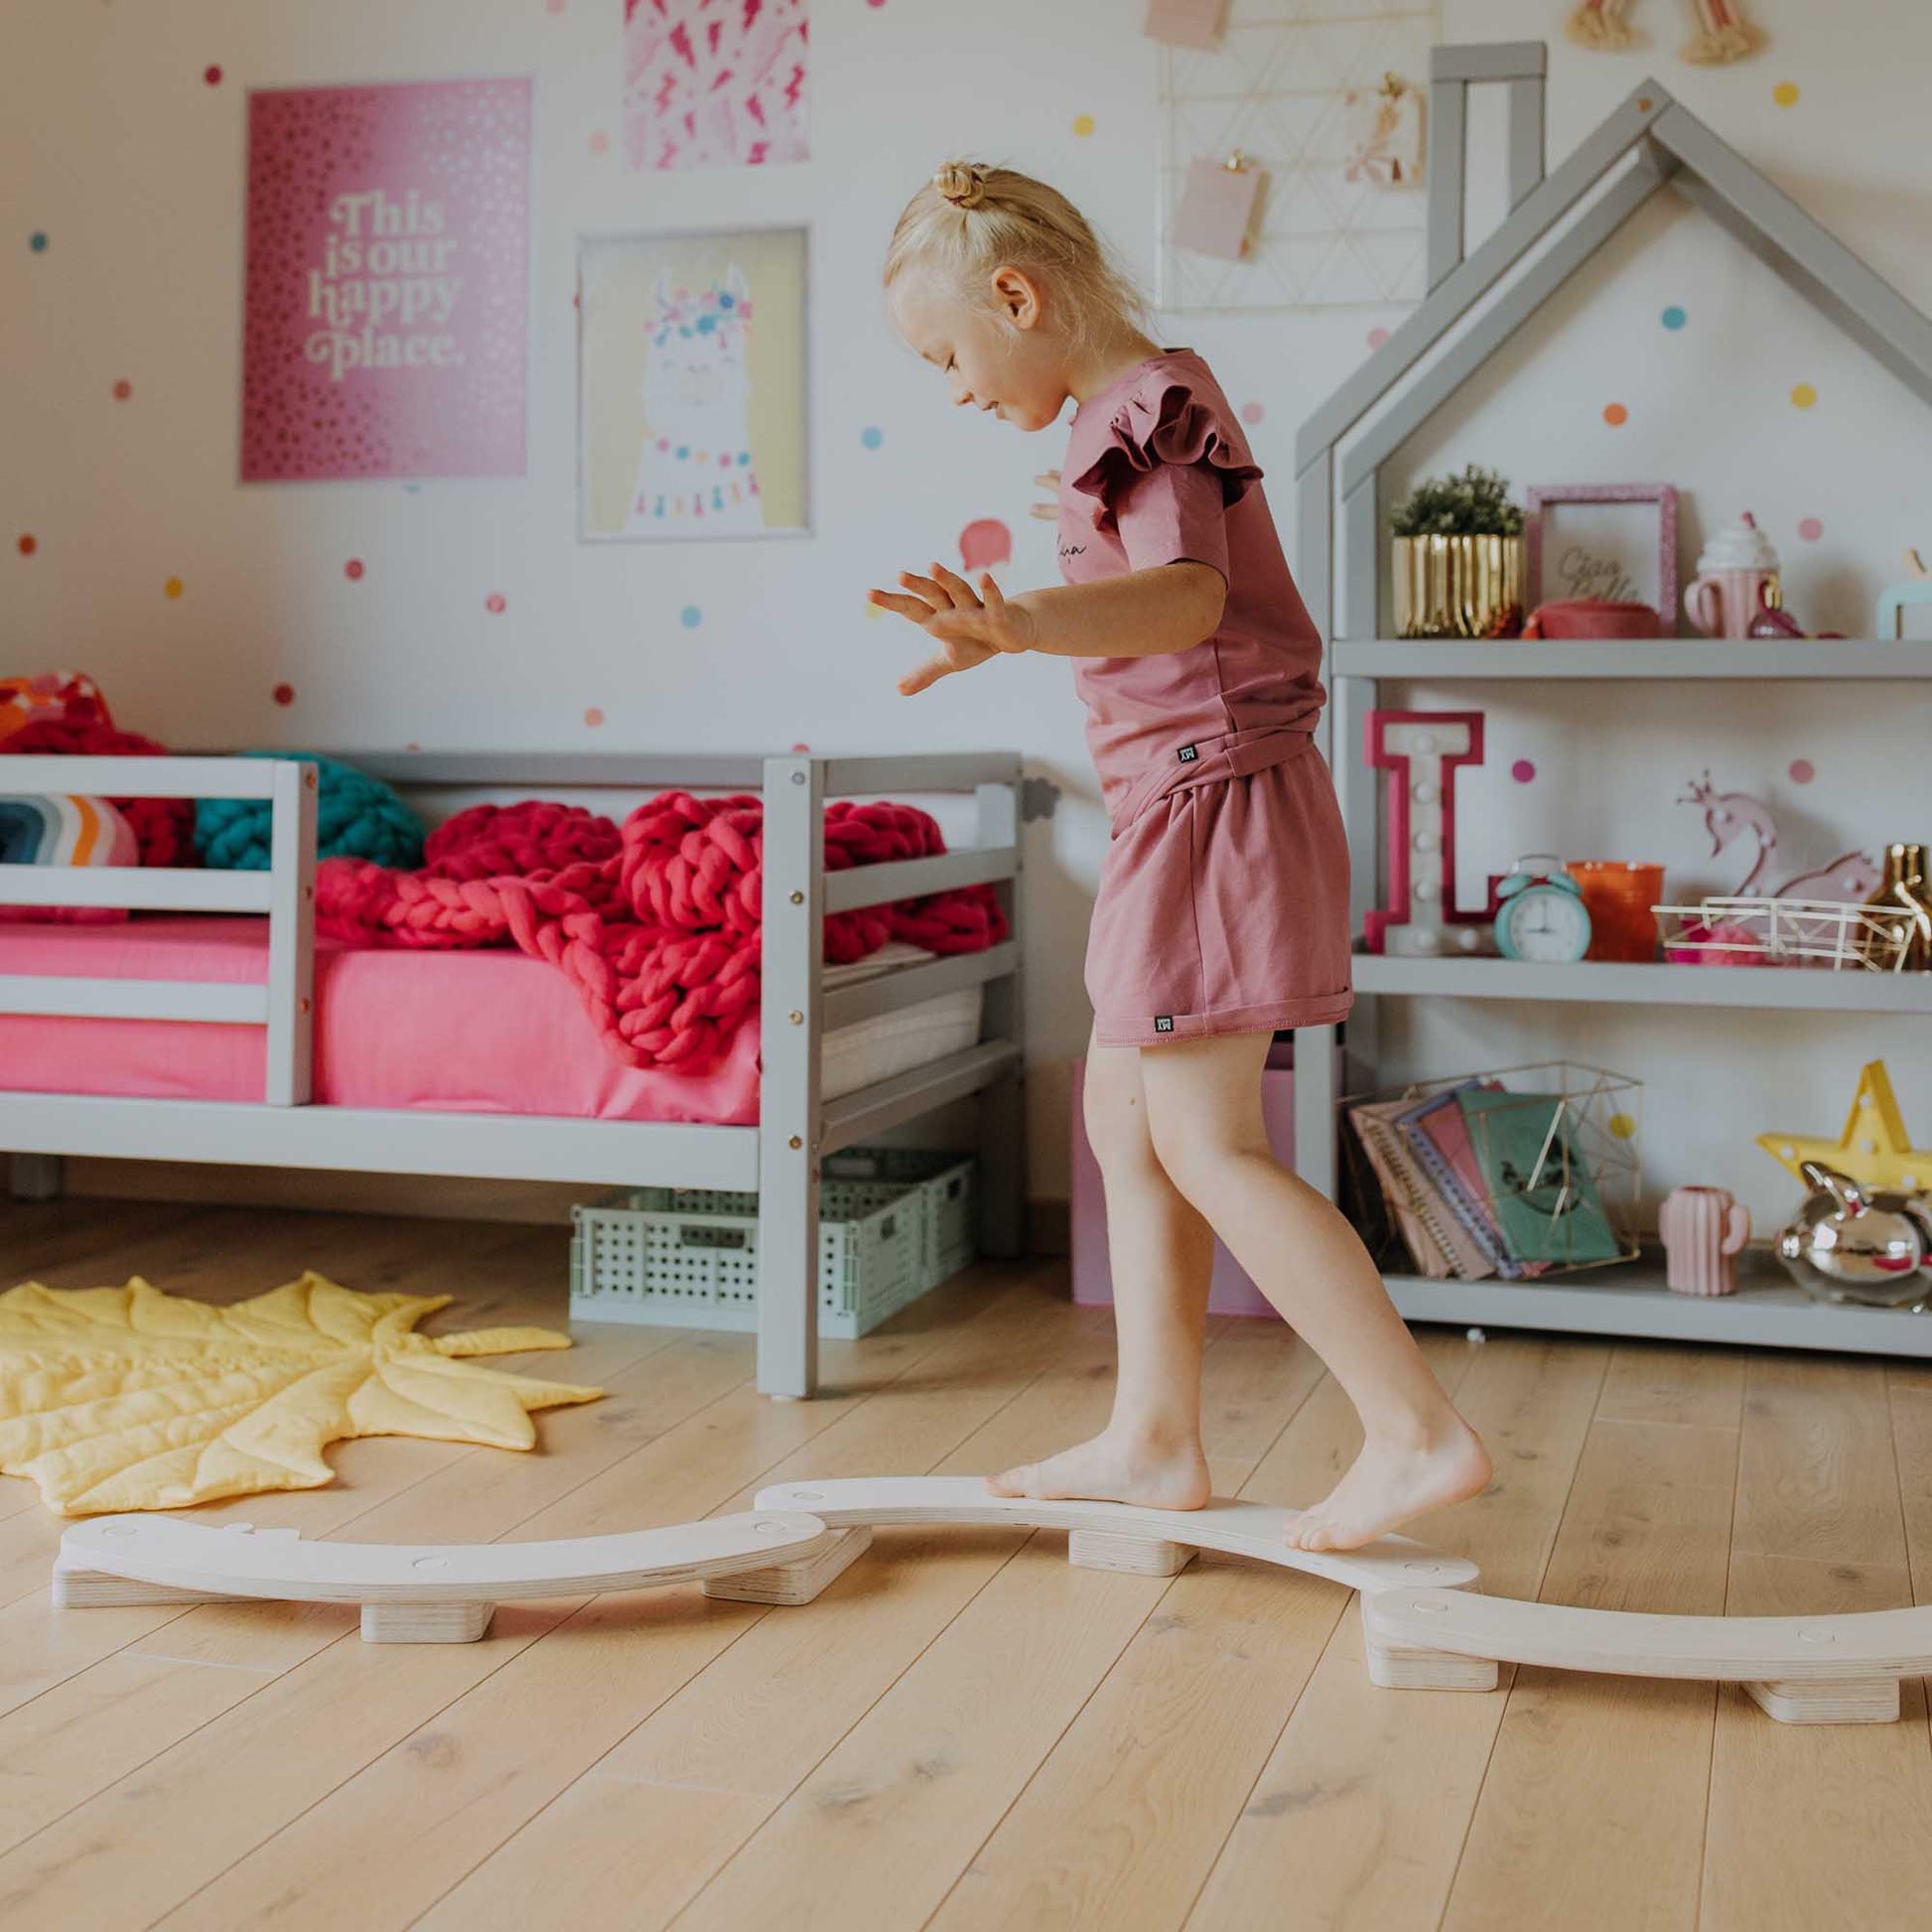 A little girl is standing on a wooden track, exploring her new Round Balance Beams Set gifted for her second birthday.